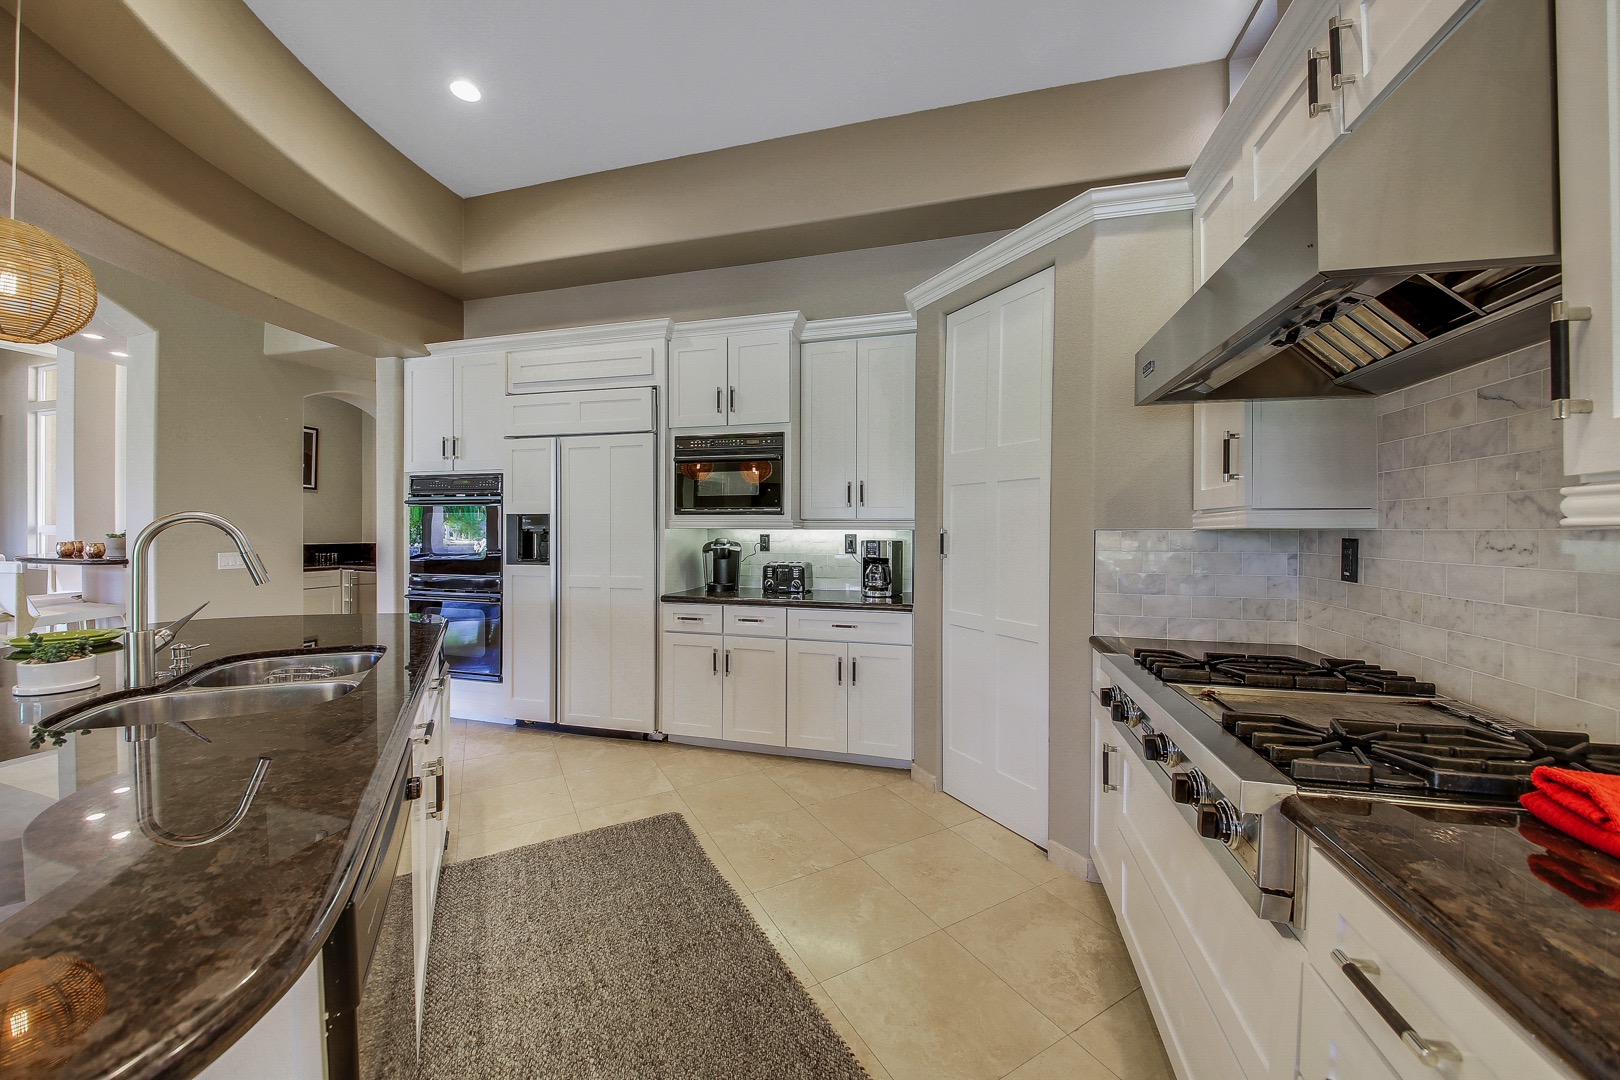 The island has plenty of room so you can cook and entertain. The fully-equipped kitchen offers everything you would need to cook those homemade meals.